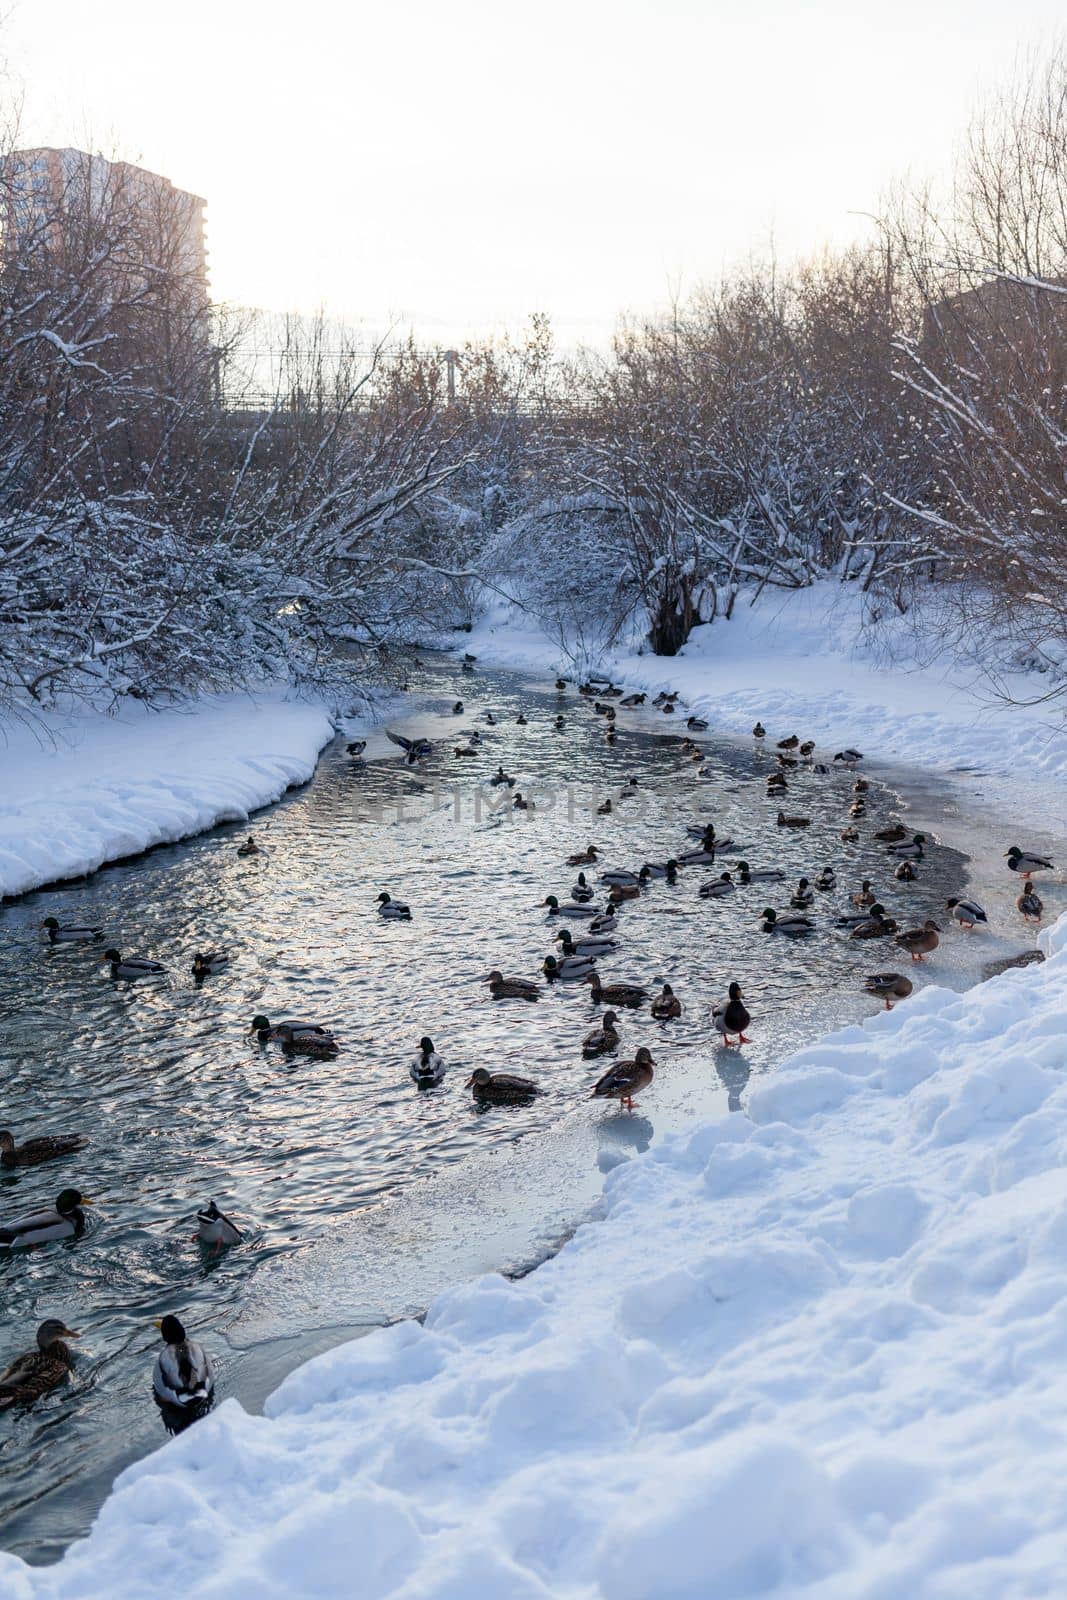 Ducks swim in the river in the city's public park in winter. Migration of birds. Ducks and pigeons in the park are waiting for food from people.